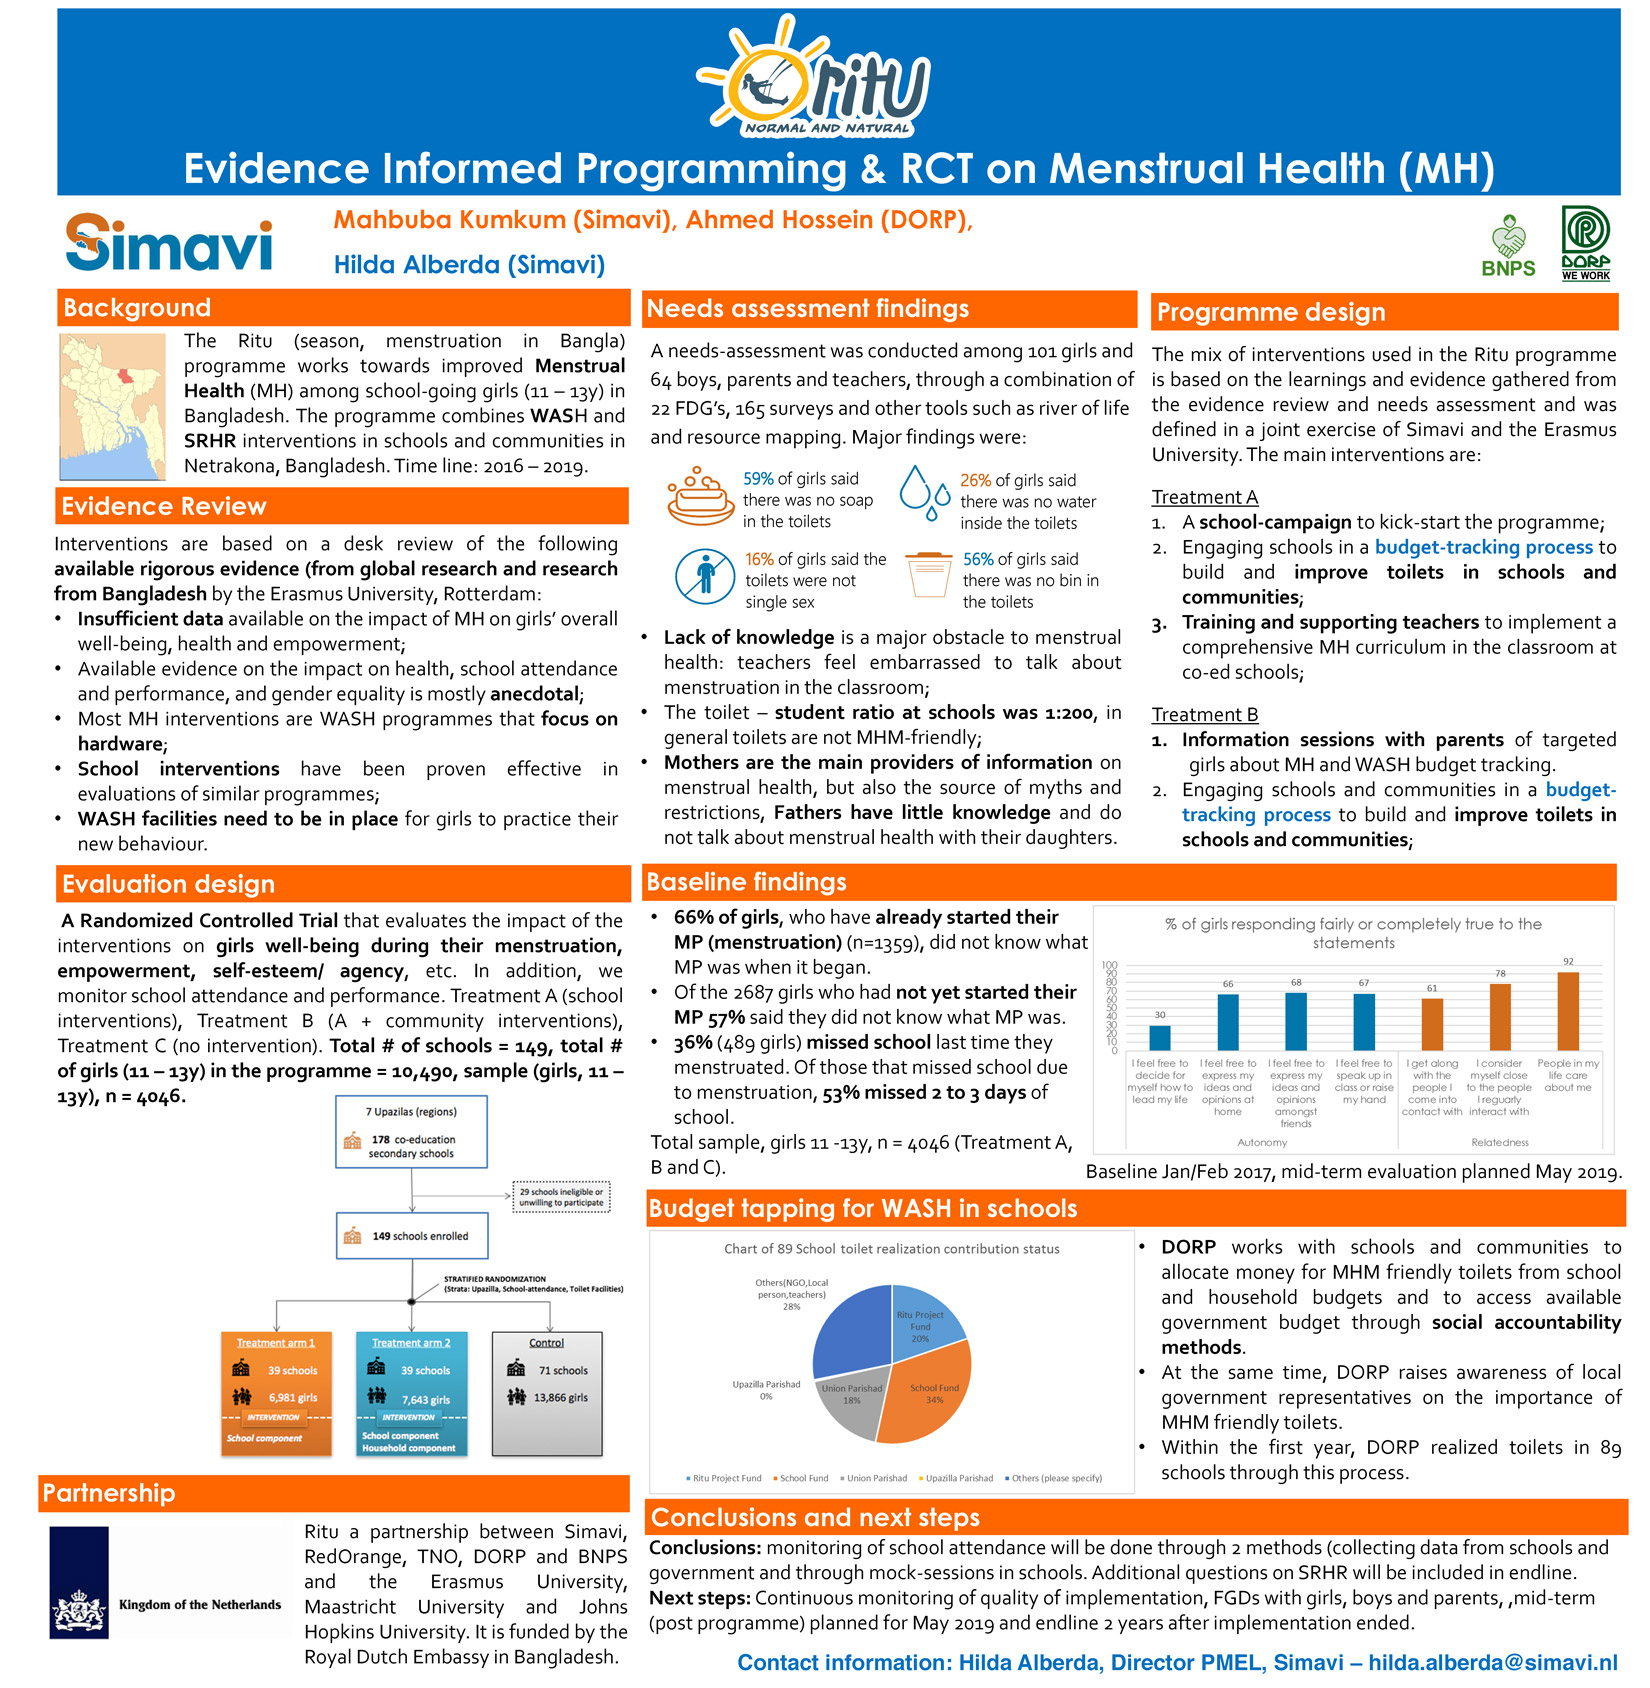 Evidence Informed Programming and RCT on Menstrual Health (MH)